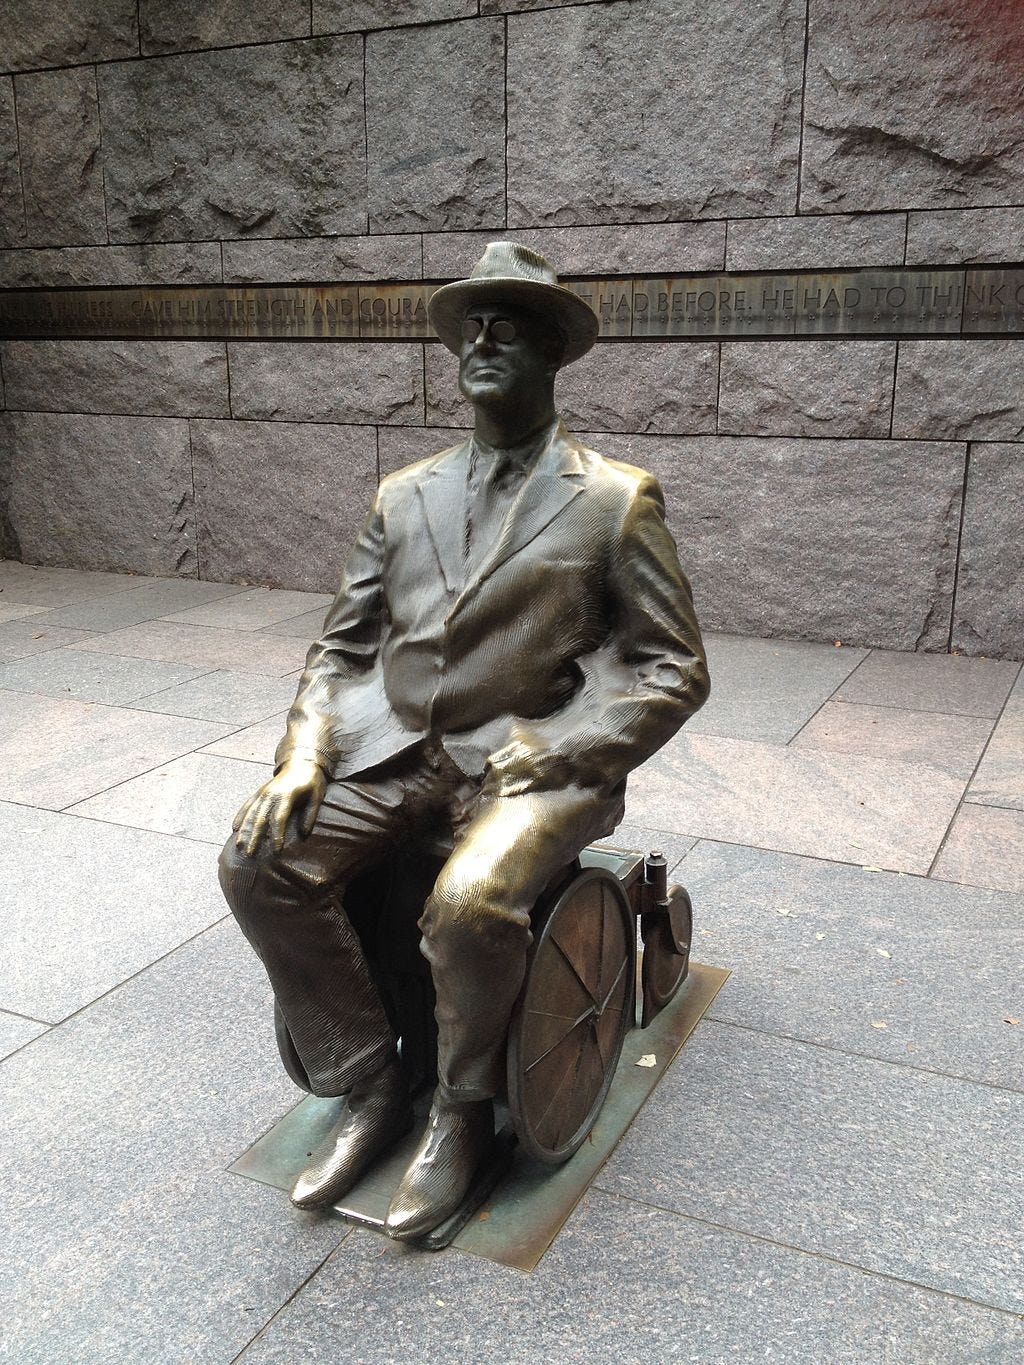 The new statue openly showing Roosevelt in his wheelchair.